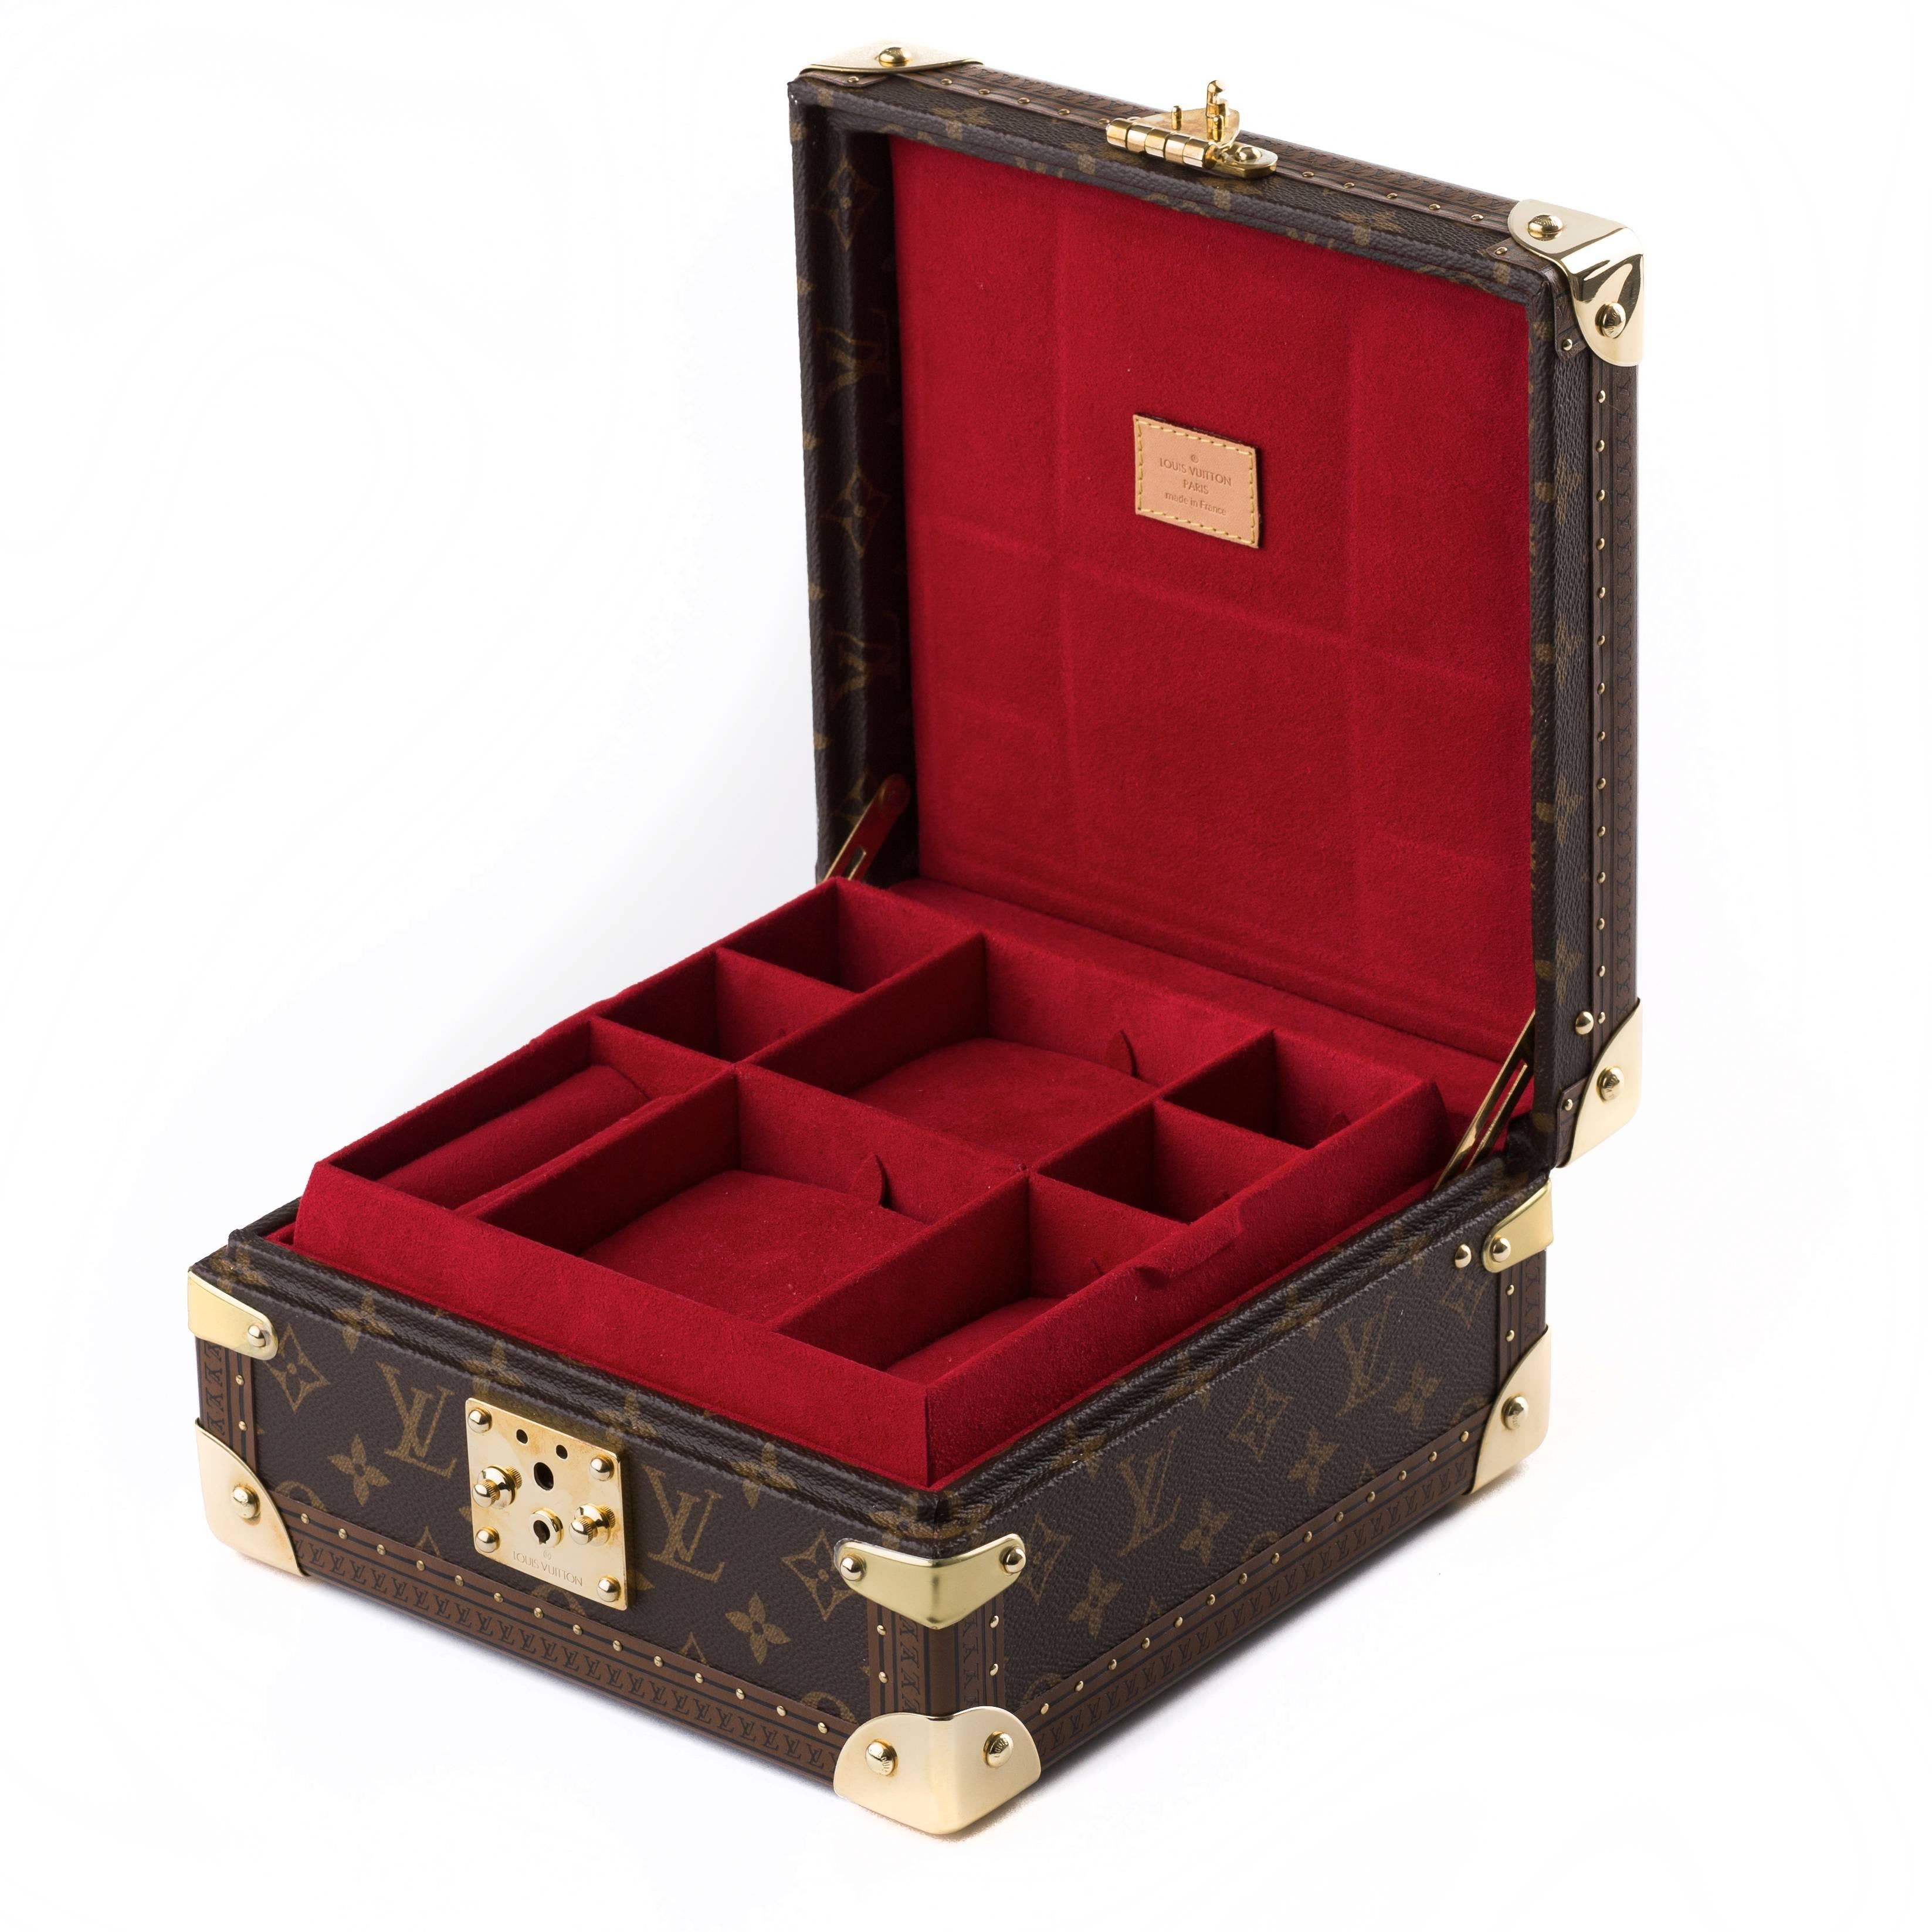 Beautiful Louis Vuitton jewelry case with brass hardware.
The jewelry case is lockable and lined with a luxe red velvet it also has a removable inner tray.
The eleven internal compartments all feature a padded red velvet cushion adding to the